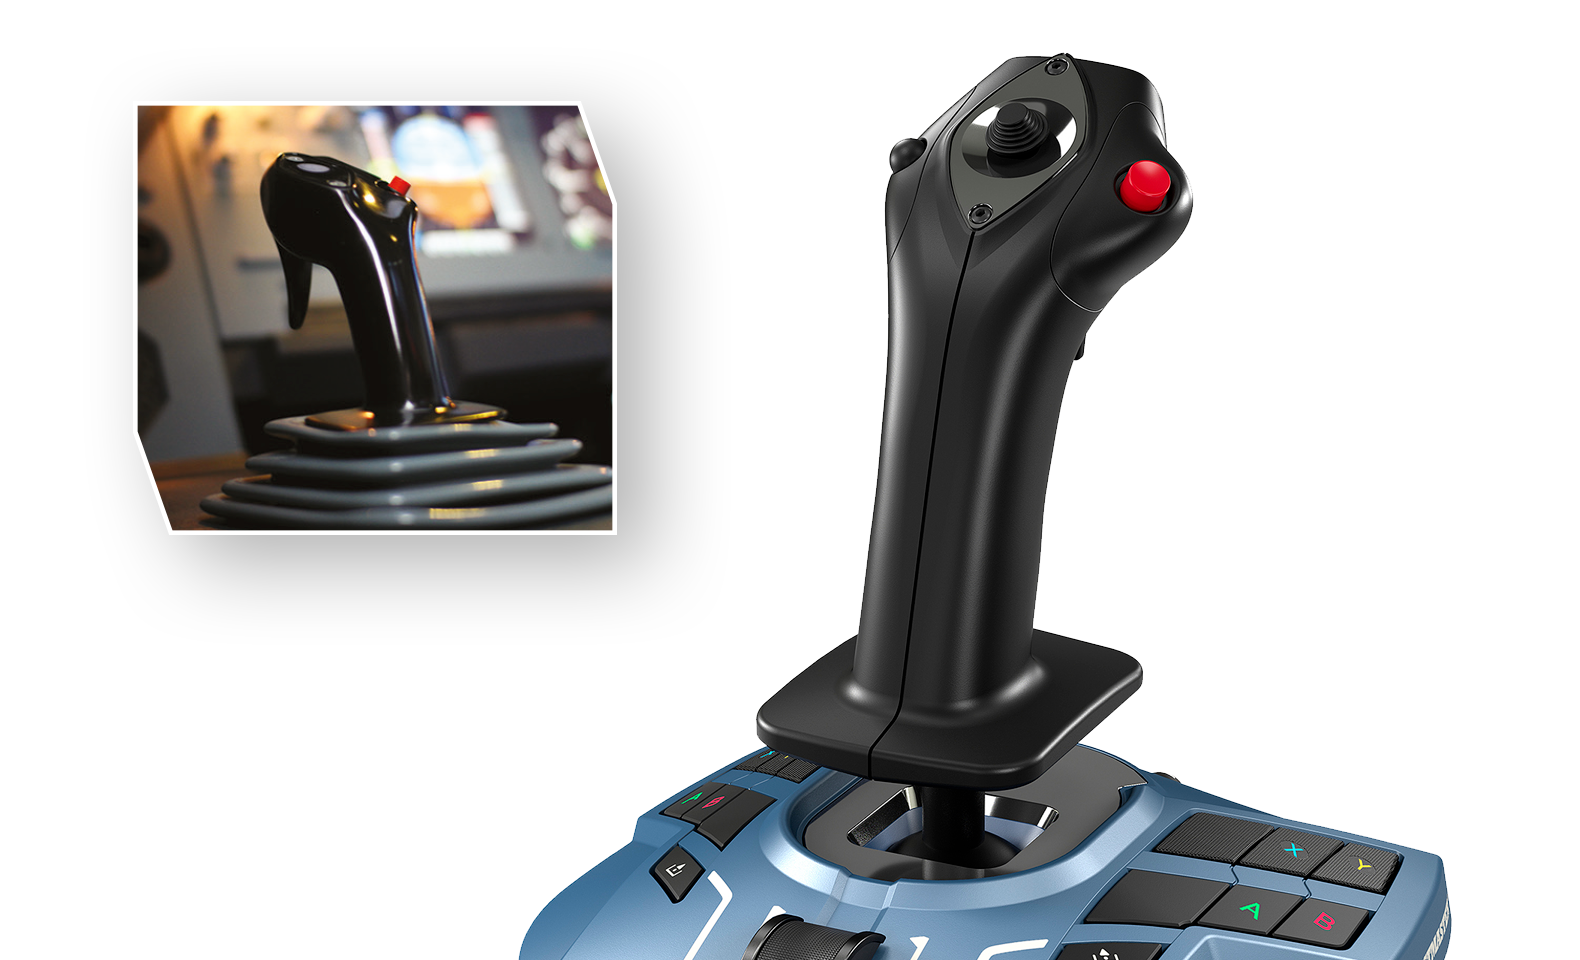 Thrustmaster unveils official Airbus gear ahead of 'Flight